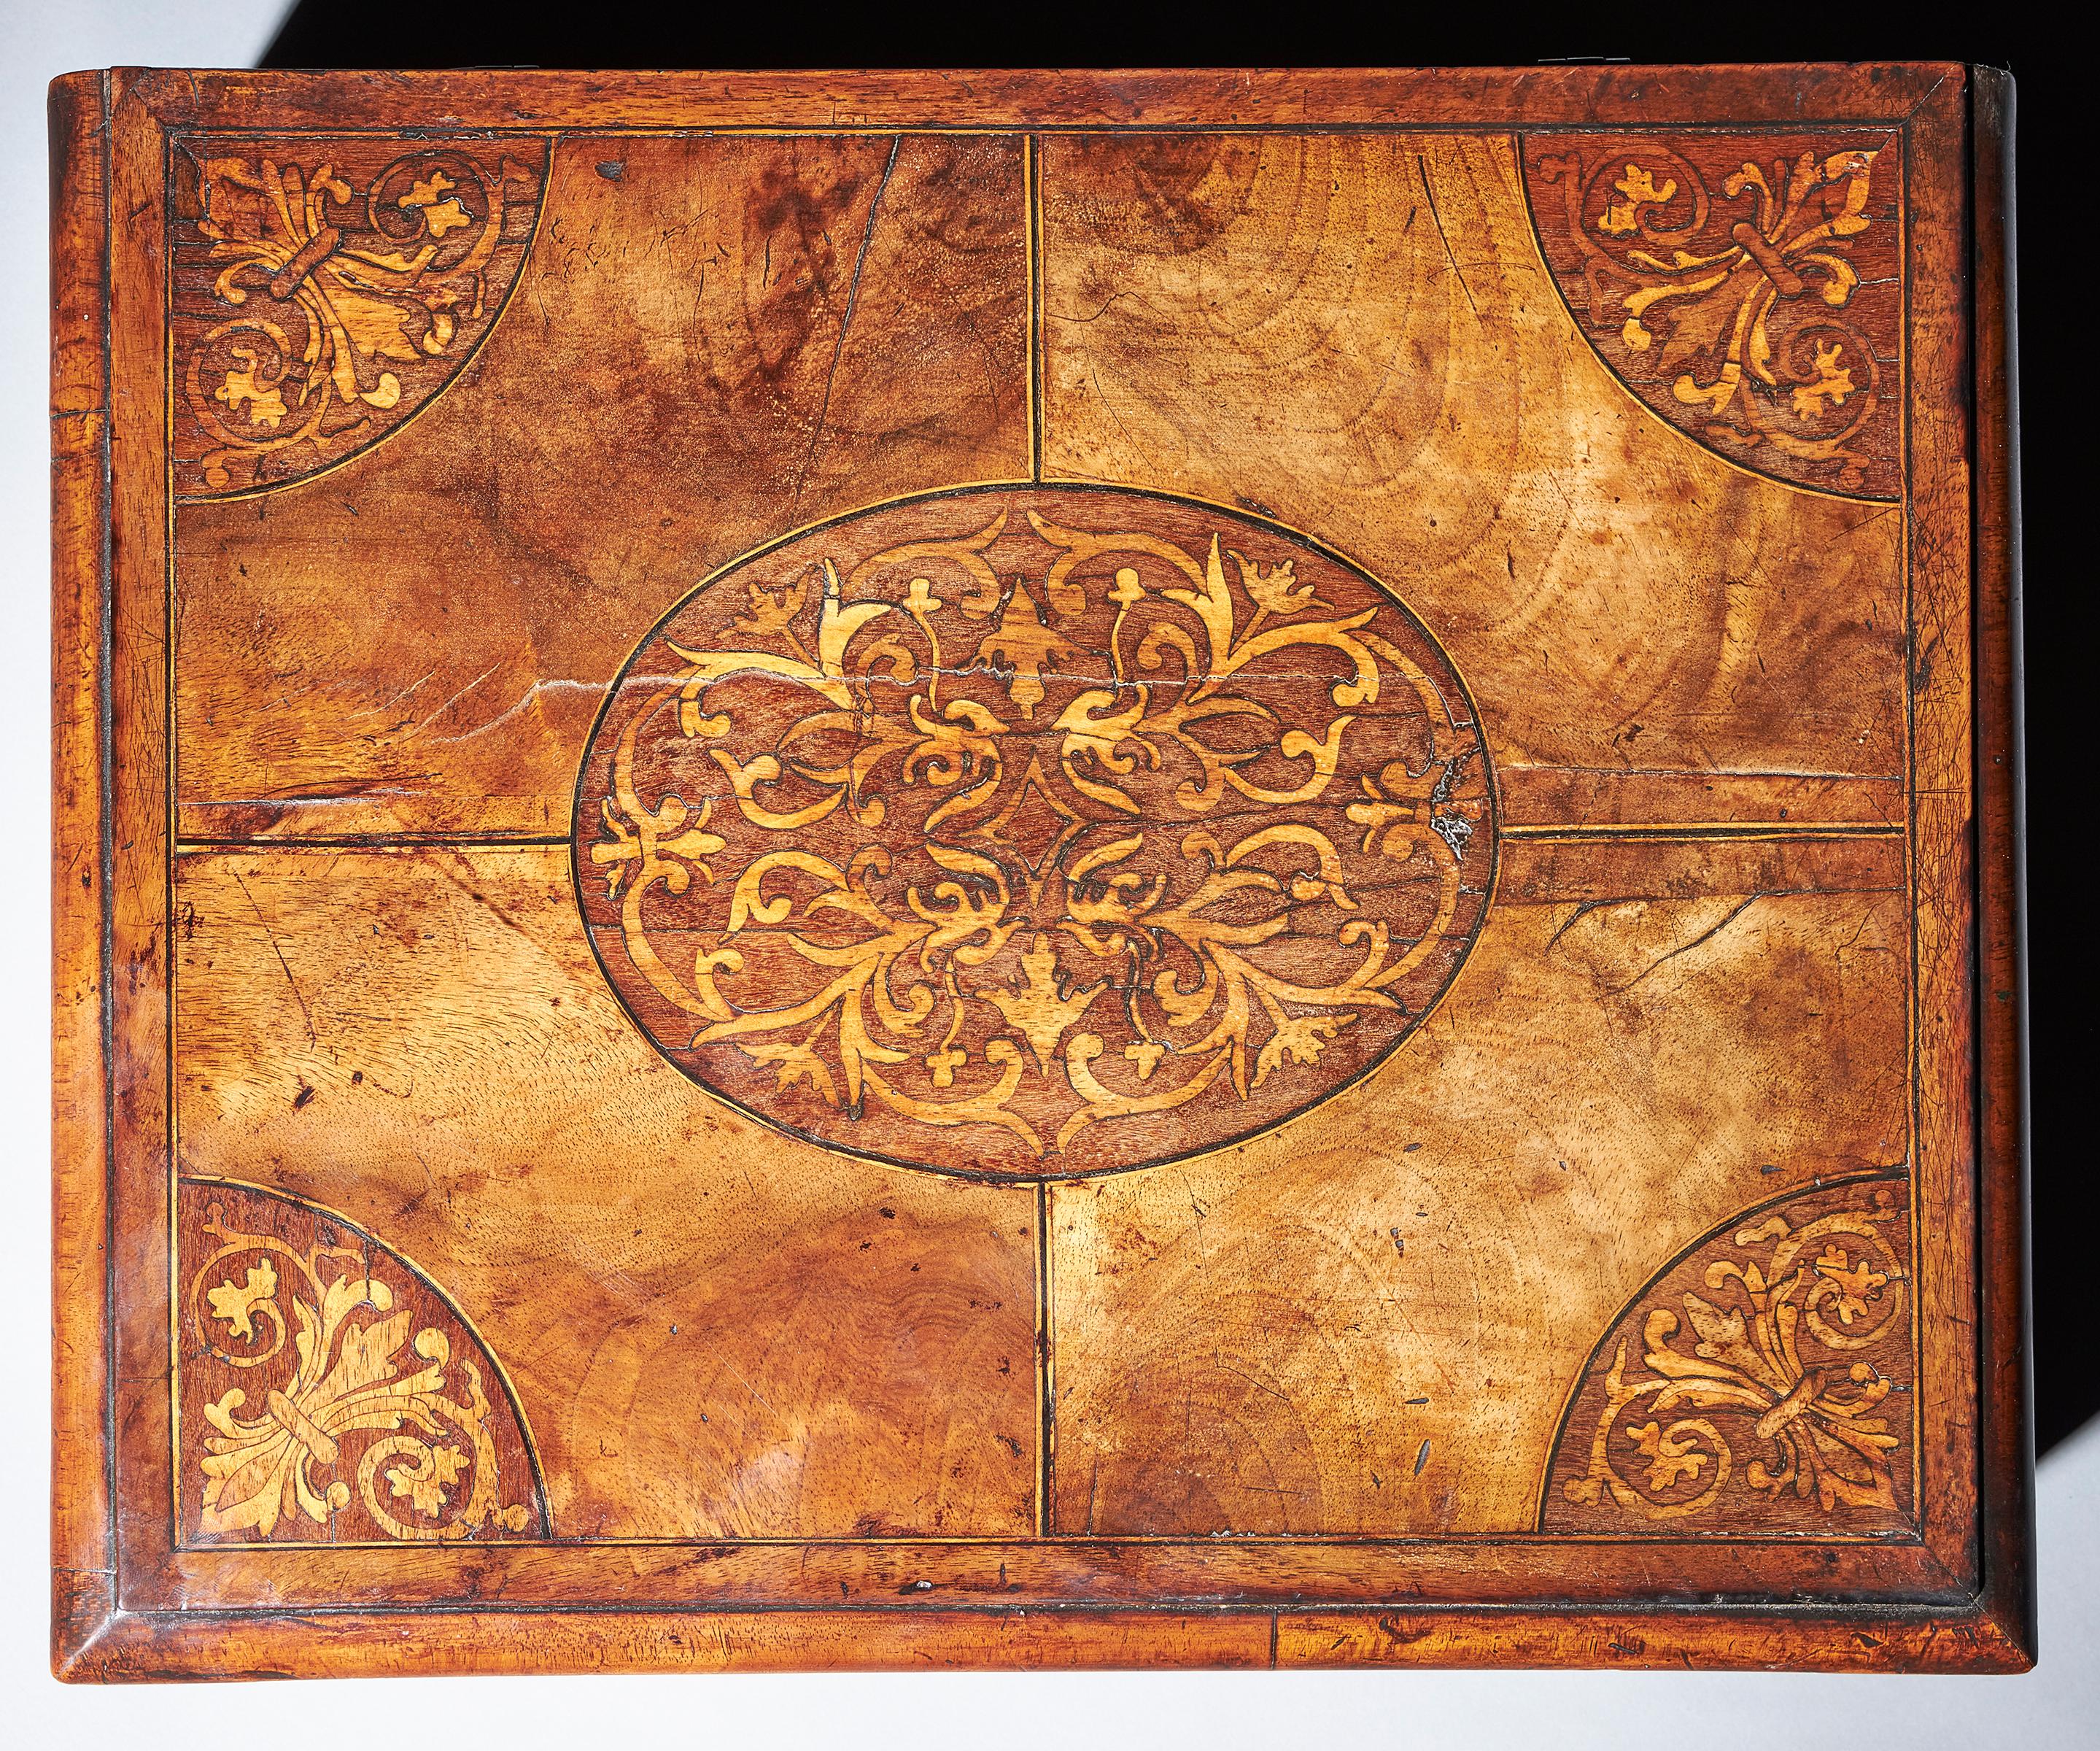 A fine and extremely rare figured walnut and seaweed marquetry 'lace box', circa.... let’s break it down - Seaweed marquetry first appeared in English cabinetwork in the late 17th century (Baroque period) though interestingly originated in Italy.